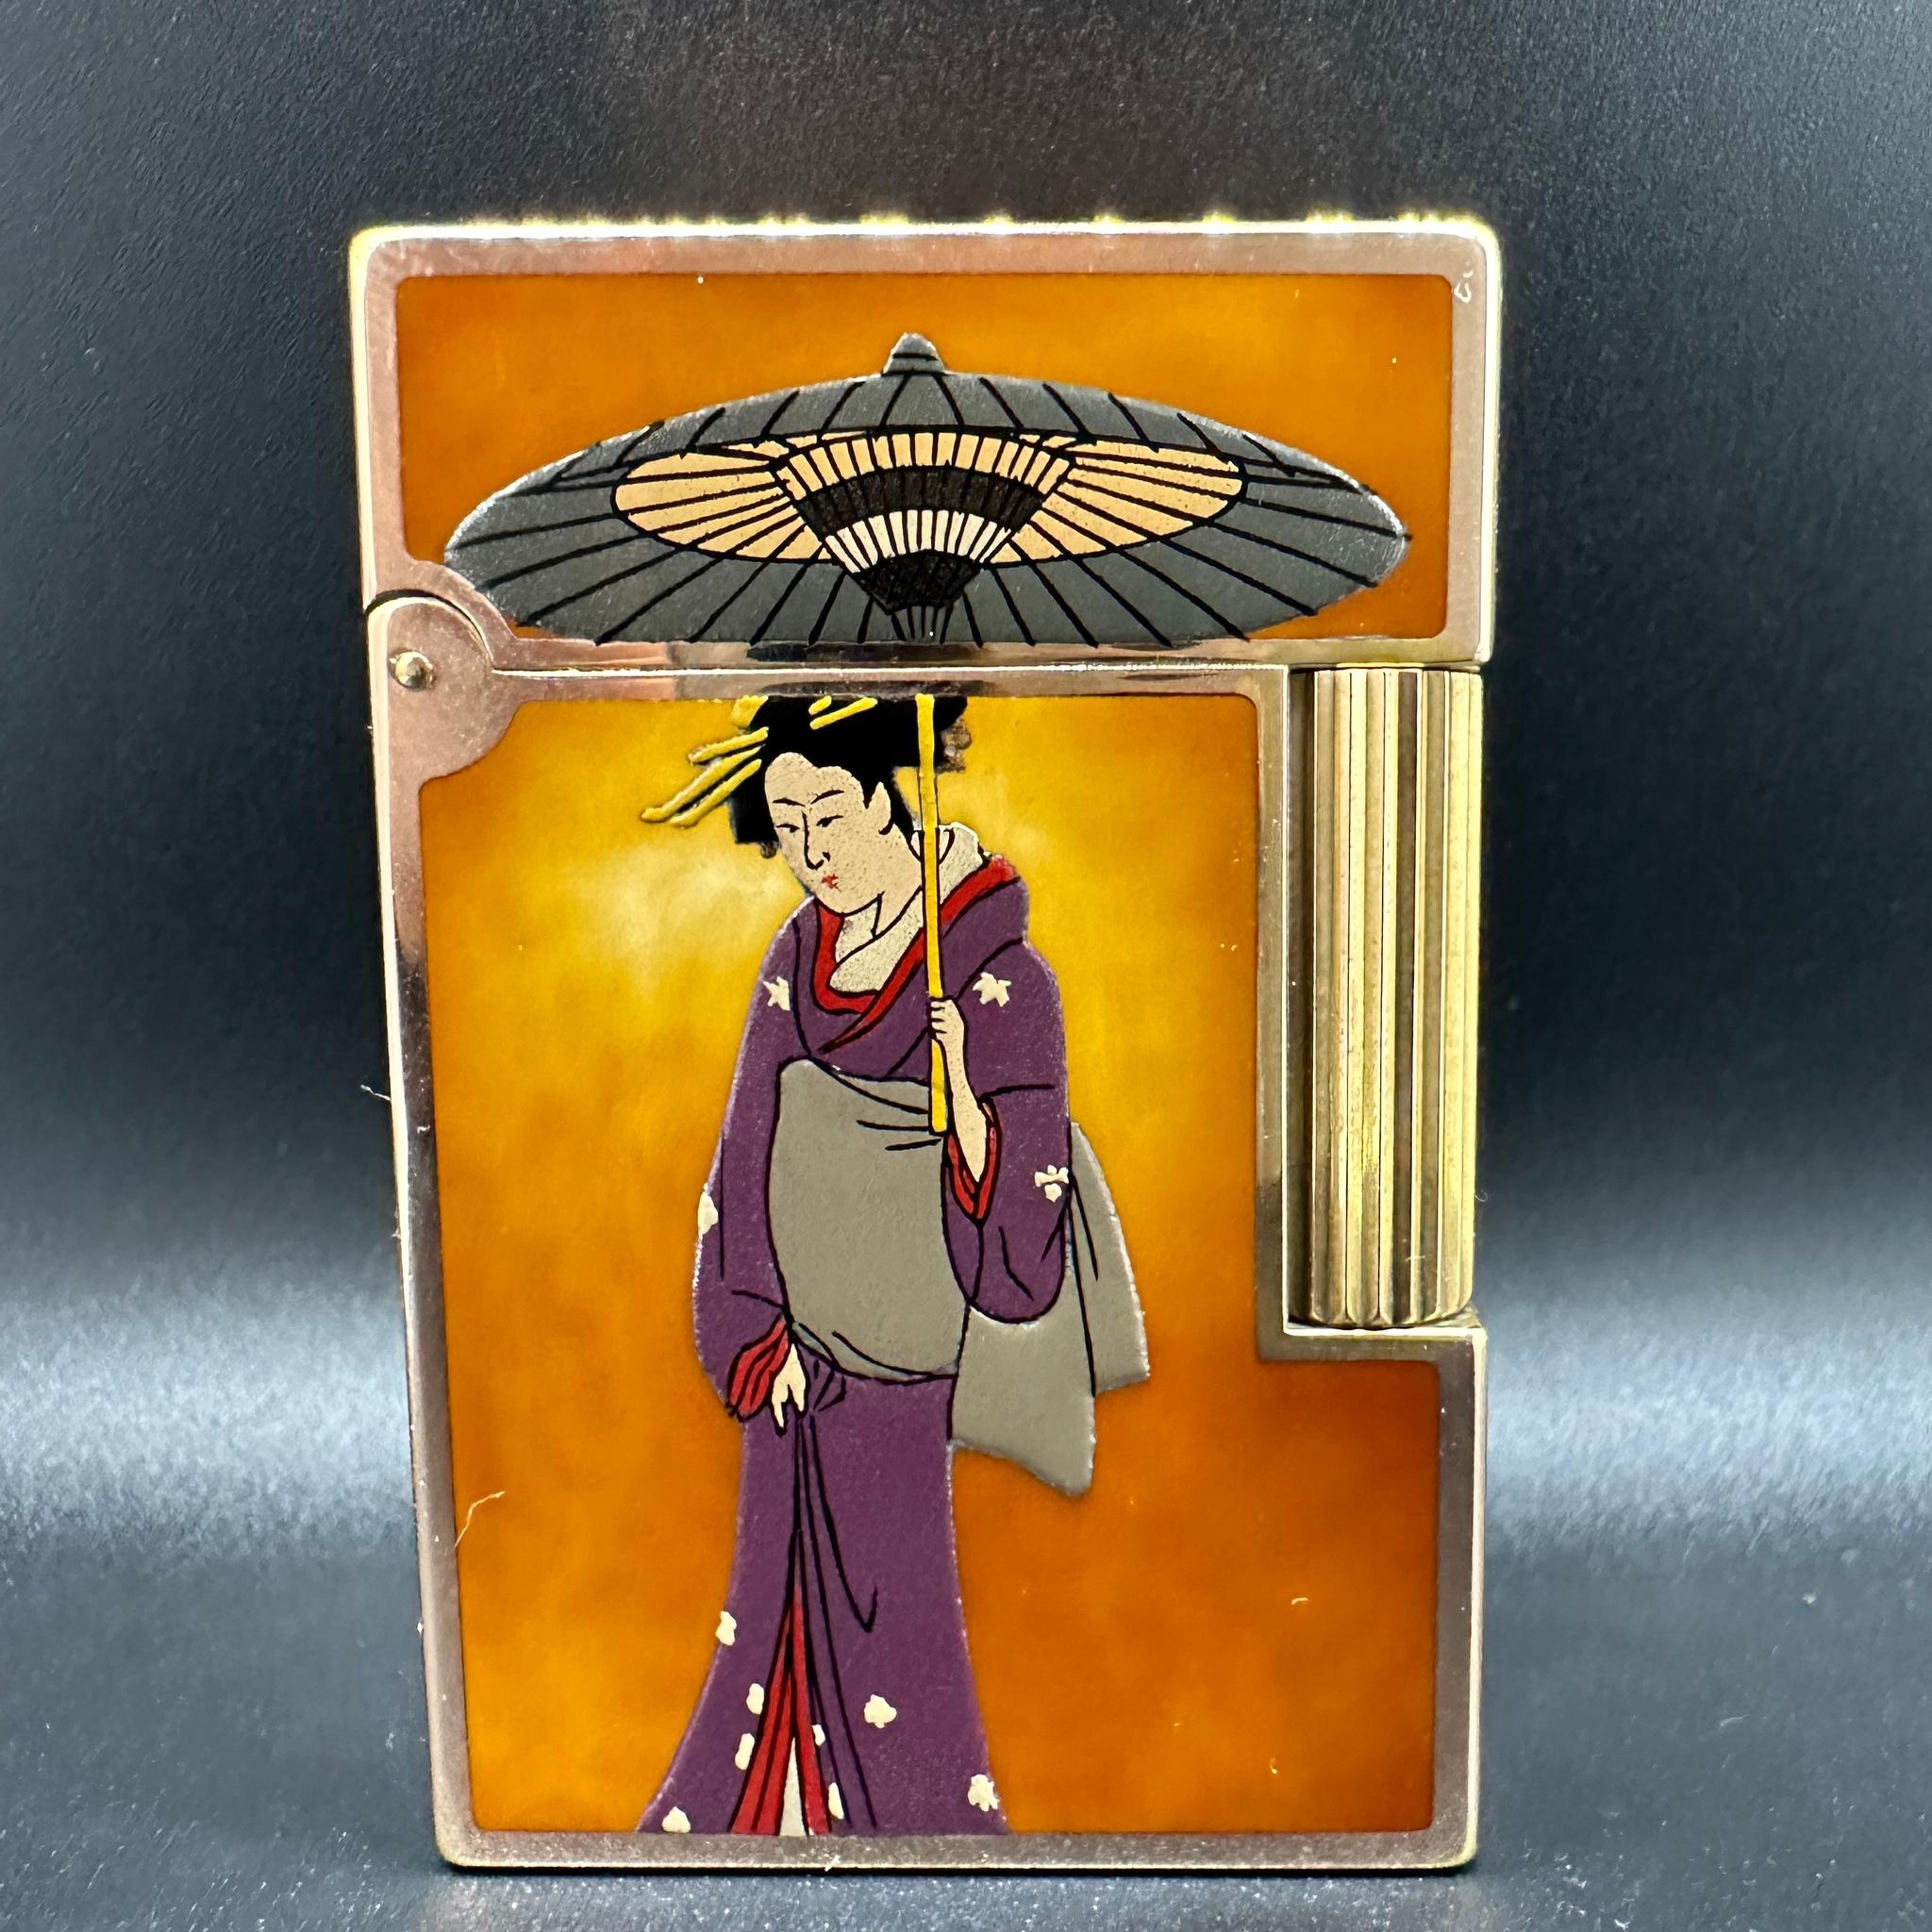 Dupont MAKI-E - The “Geisha” Gold Plated and Chinese lacquer Lighter 
Dupont Maki-E (蒔絵,
Rare - COLLECTIBLE 
Work of art
One of the most in demand  DUPONT LIGHTER 
IN EXCELLENT CONDITION AND WORKING PERFECTLY.
AUTHENTIC 
NO BOX OR PAPERS.
All